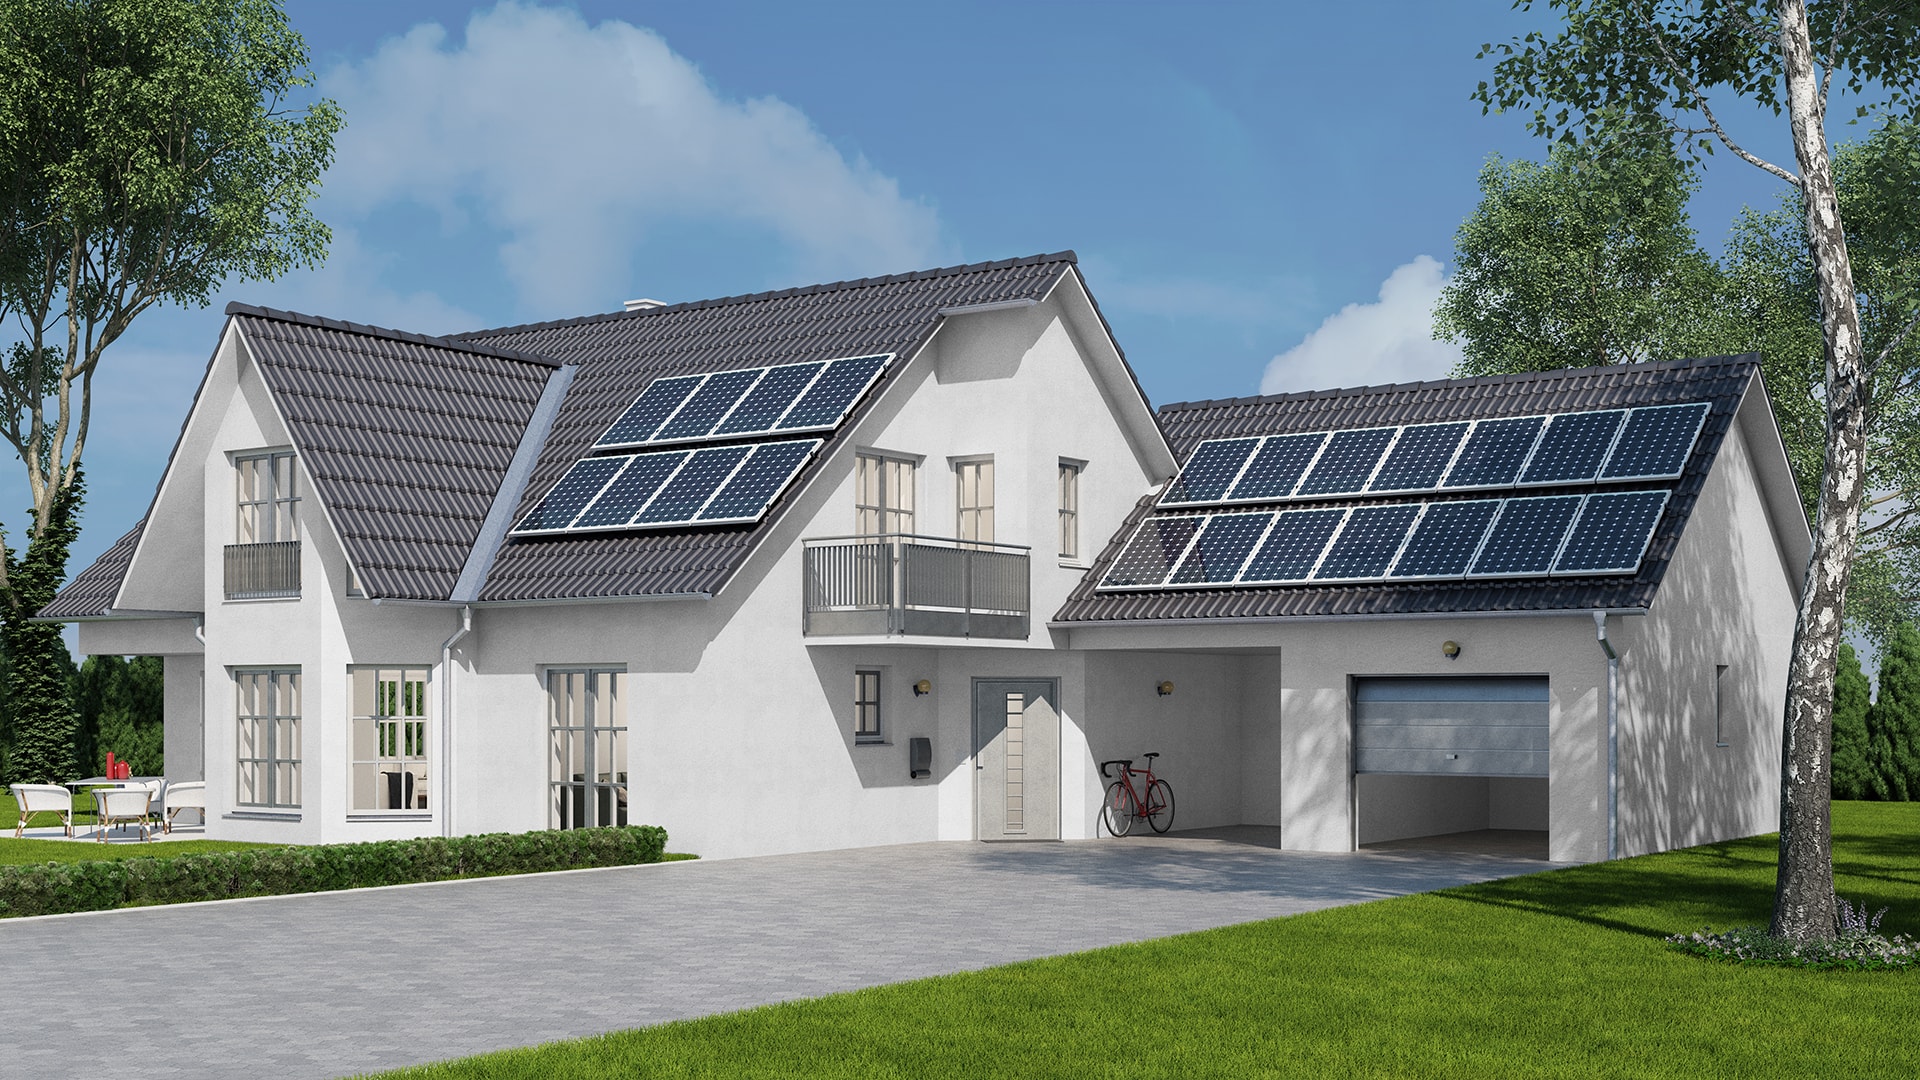 Residential solar rooftop